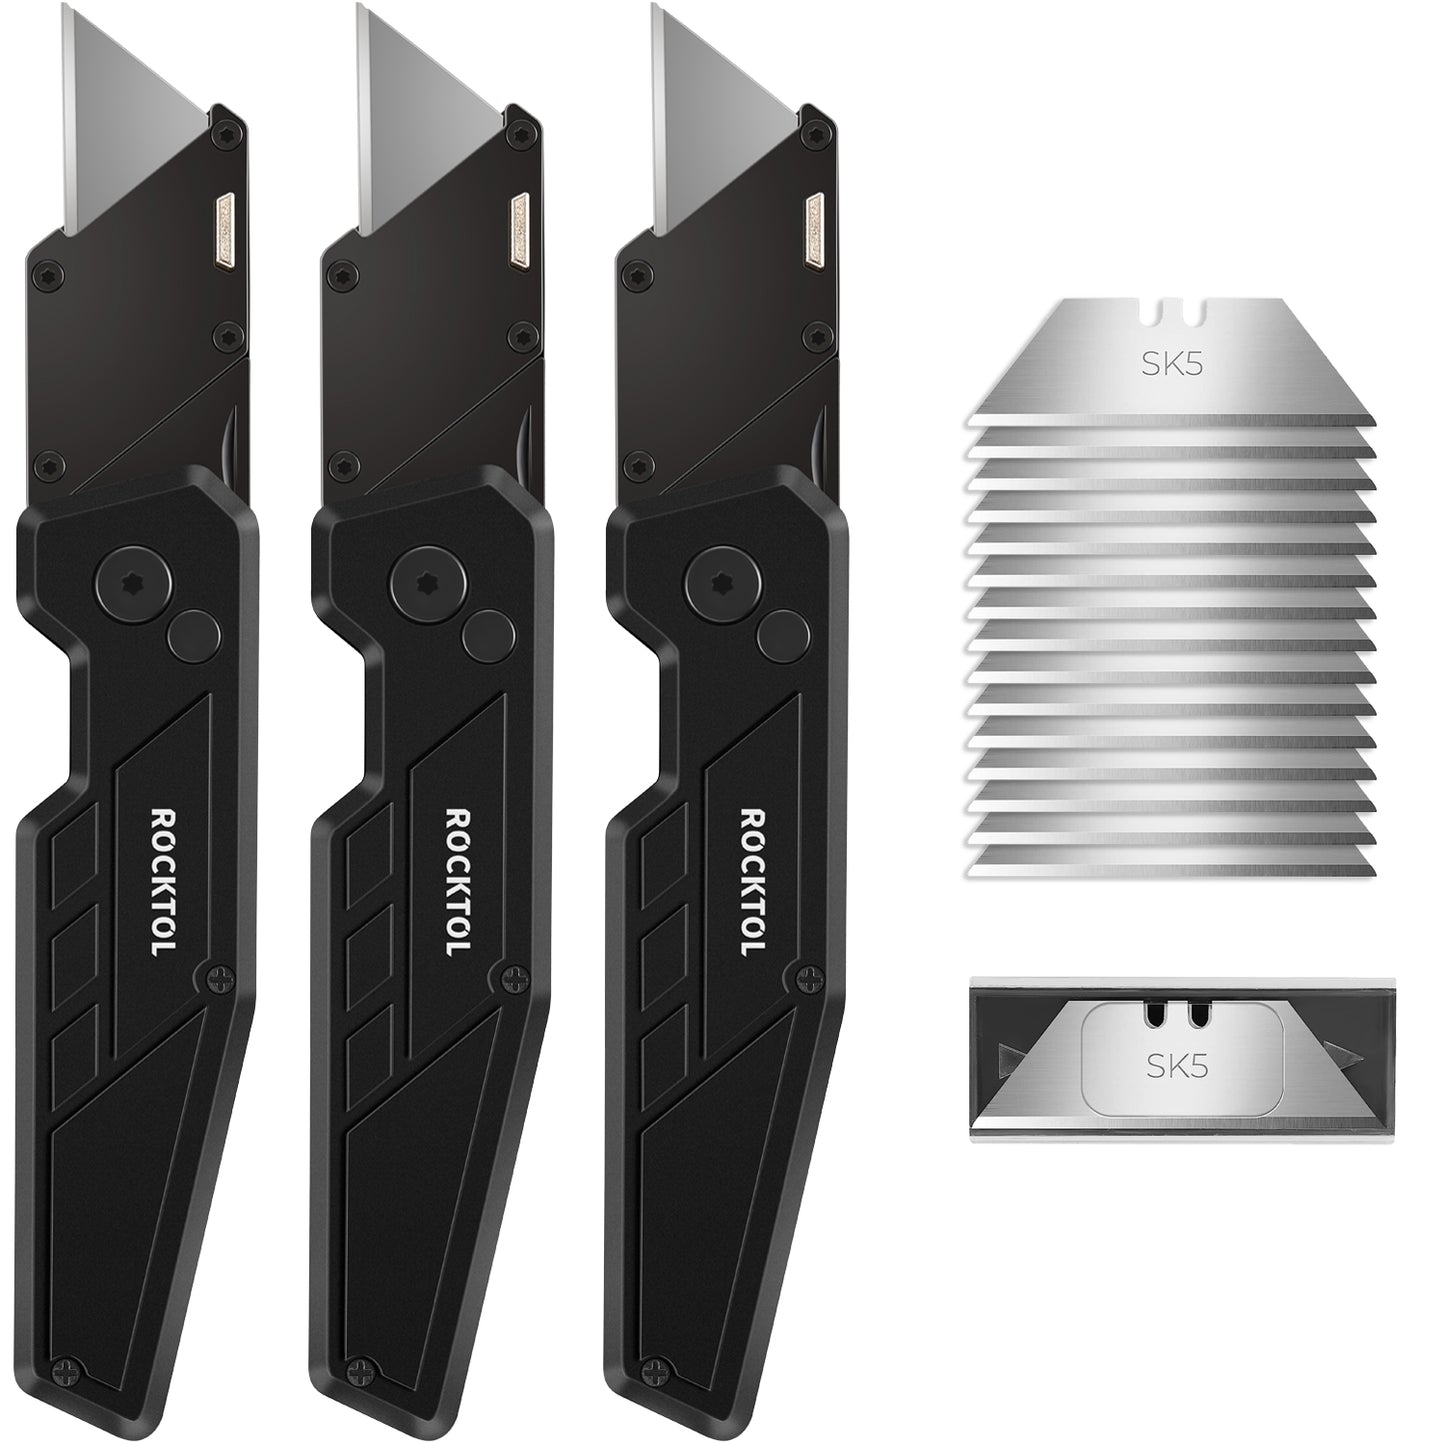 ROCKTOL 3-Pack Folding Utility Knives with Stainless Steel Head, Lightweight Reinforced Handle, Quick-change Blade, Button Lock, with Extra 15PC SK5 Blades